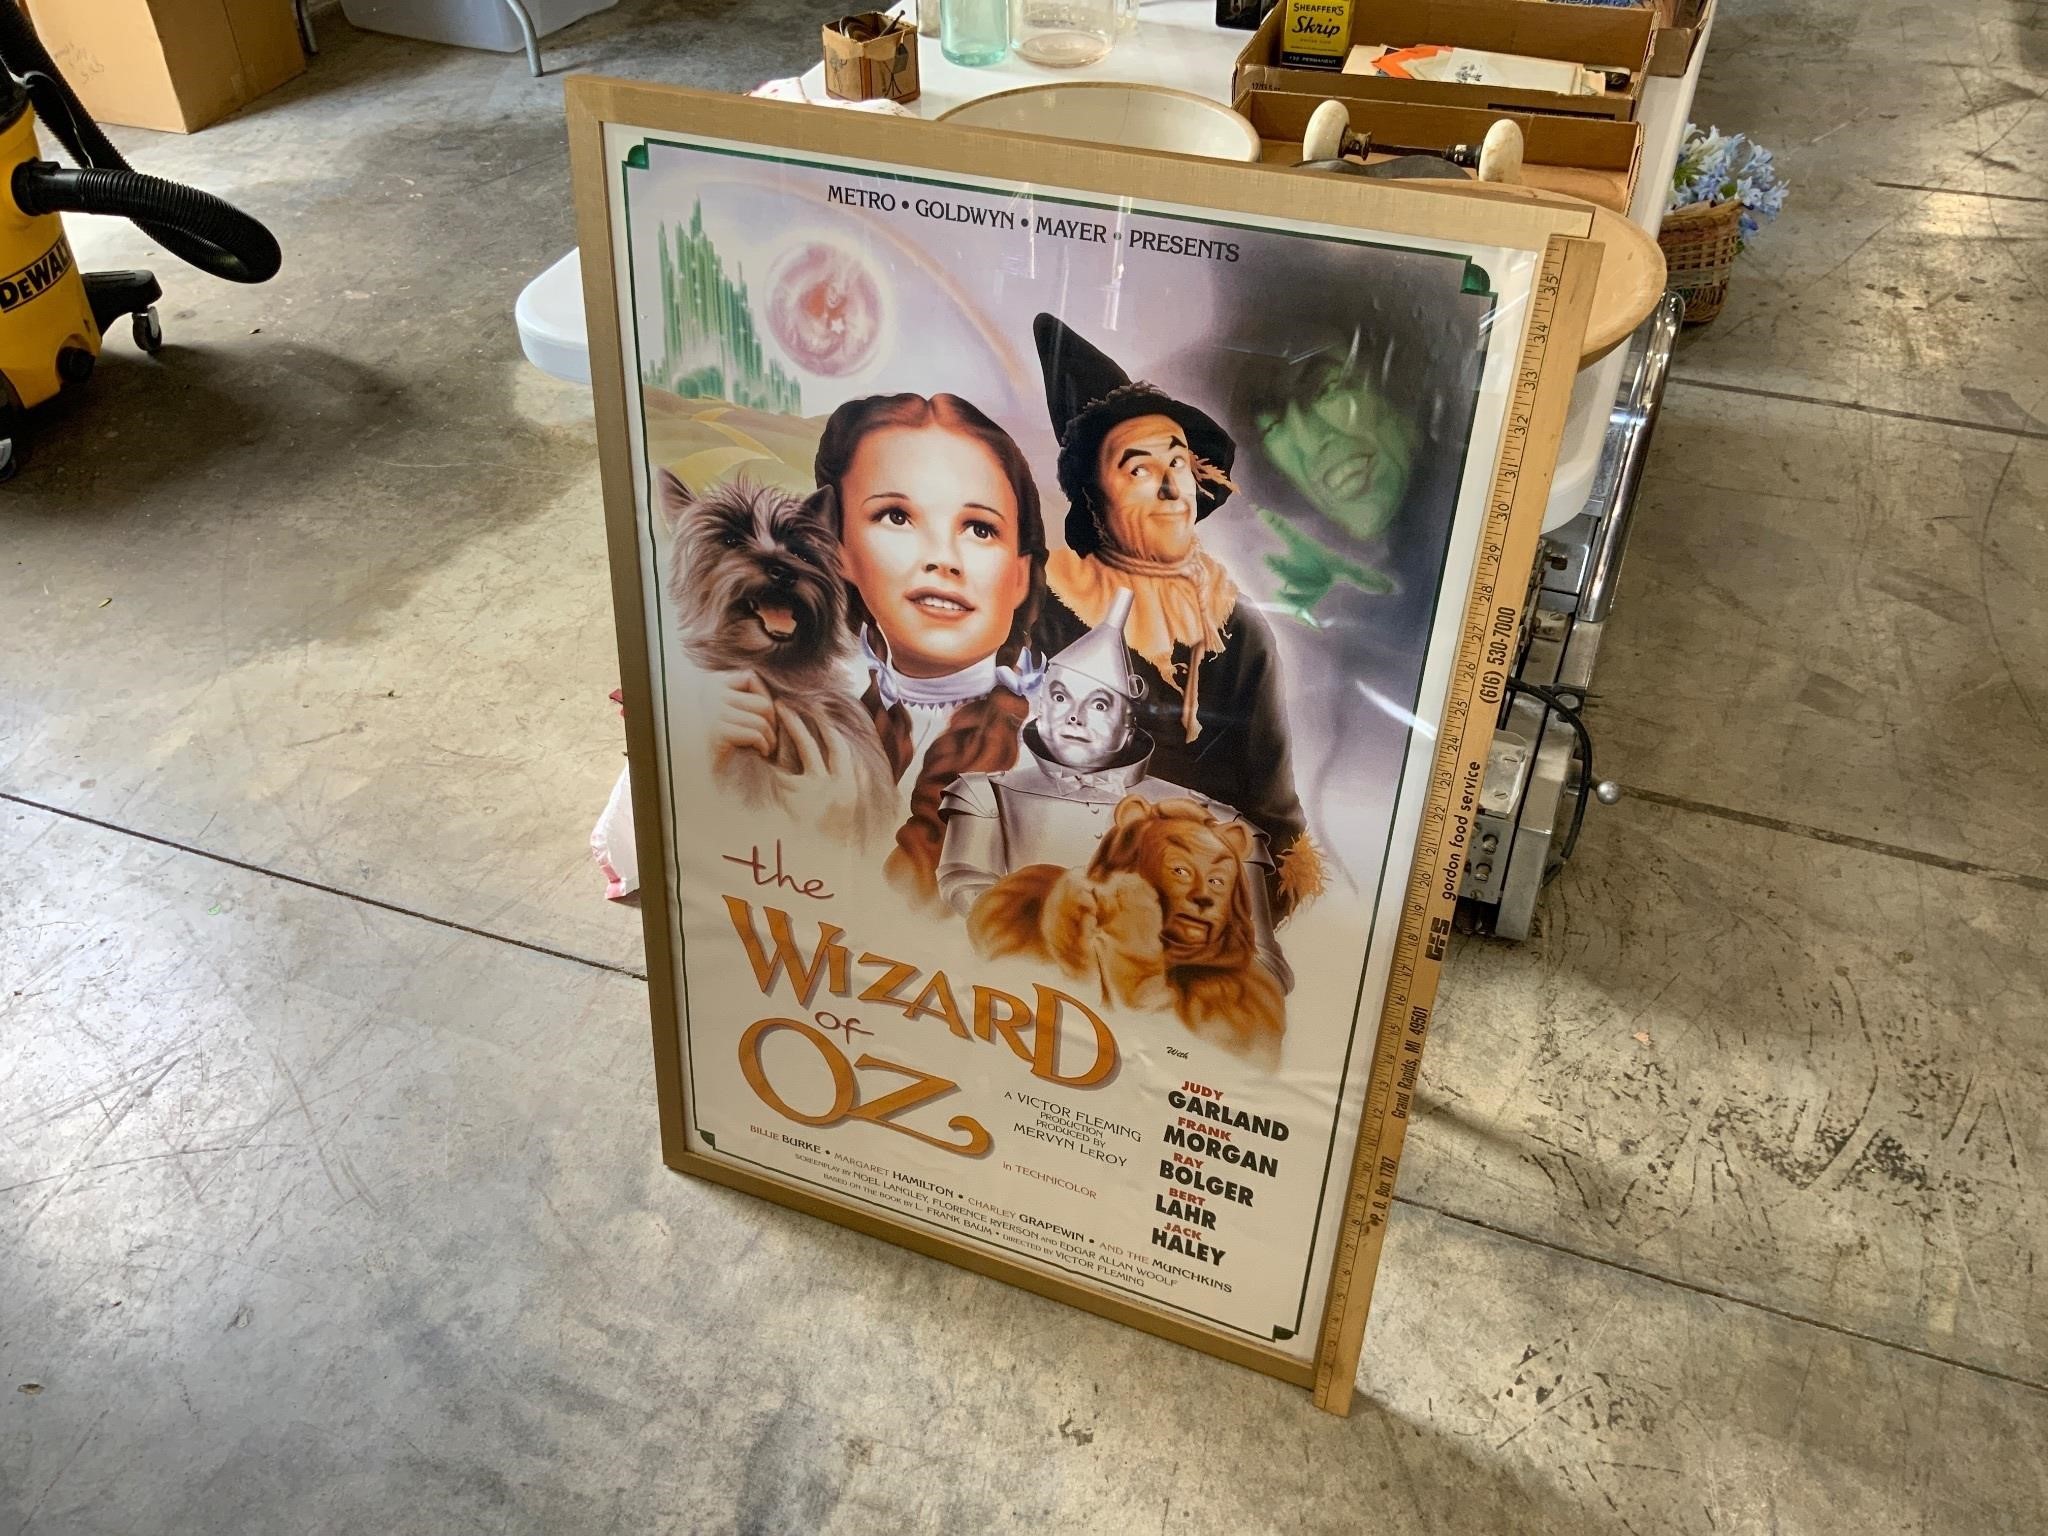 LARGE framed wizard of oz movie poster